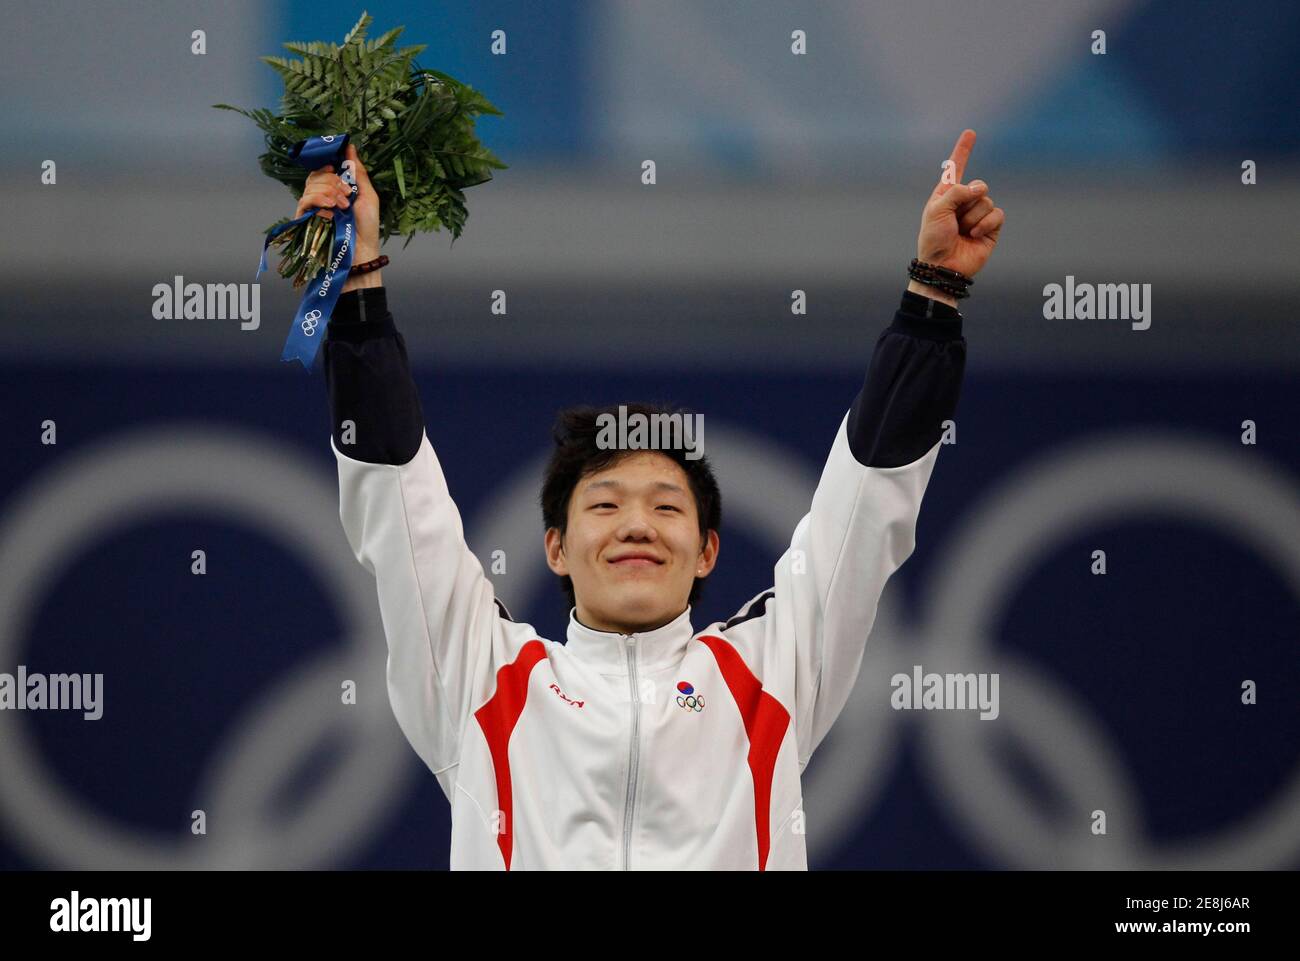 Mo Tae-bum of South Korea celebrates his victory during the flower ceremony following the men's 500 metres speed skating race at the Richmond Olympic Oval during the Vancouver 2010 Winter Olympics February 15, 2010.  REUTERS/Jerry Lampen (CANADA) Stock Photo